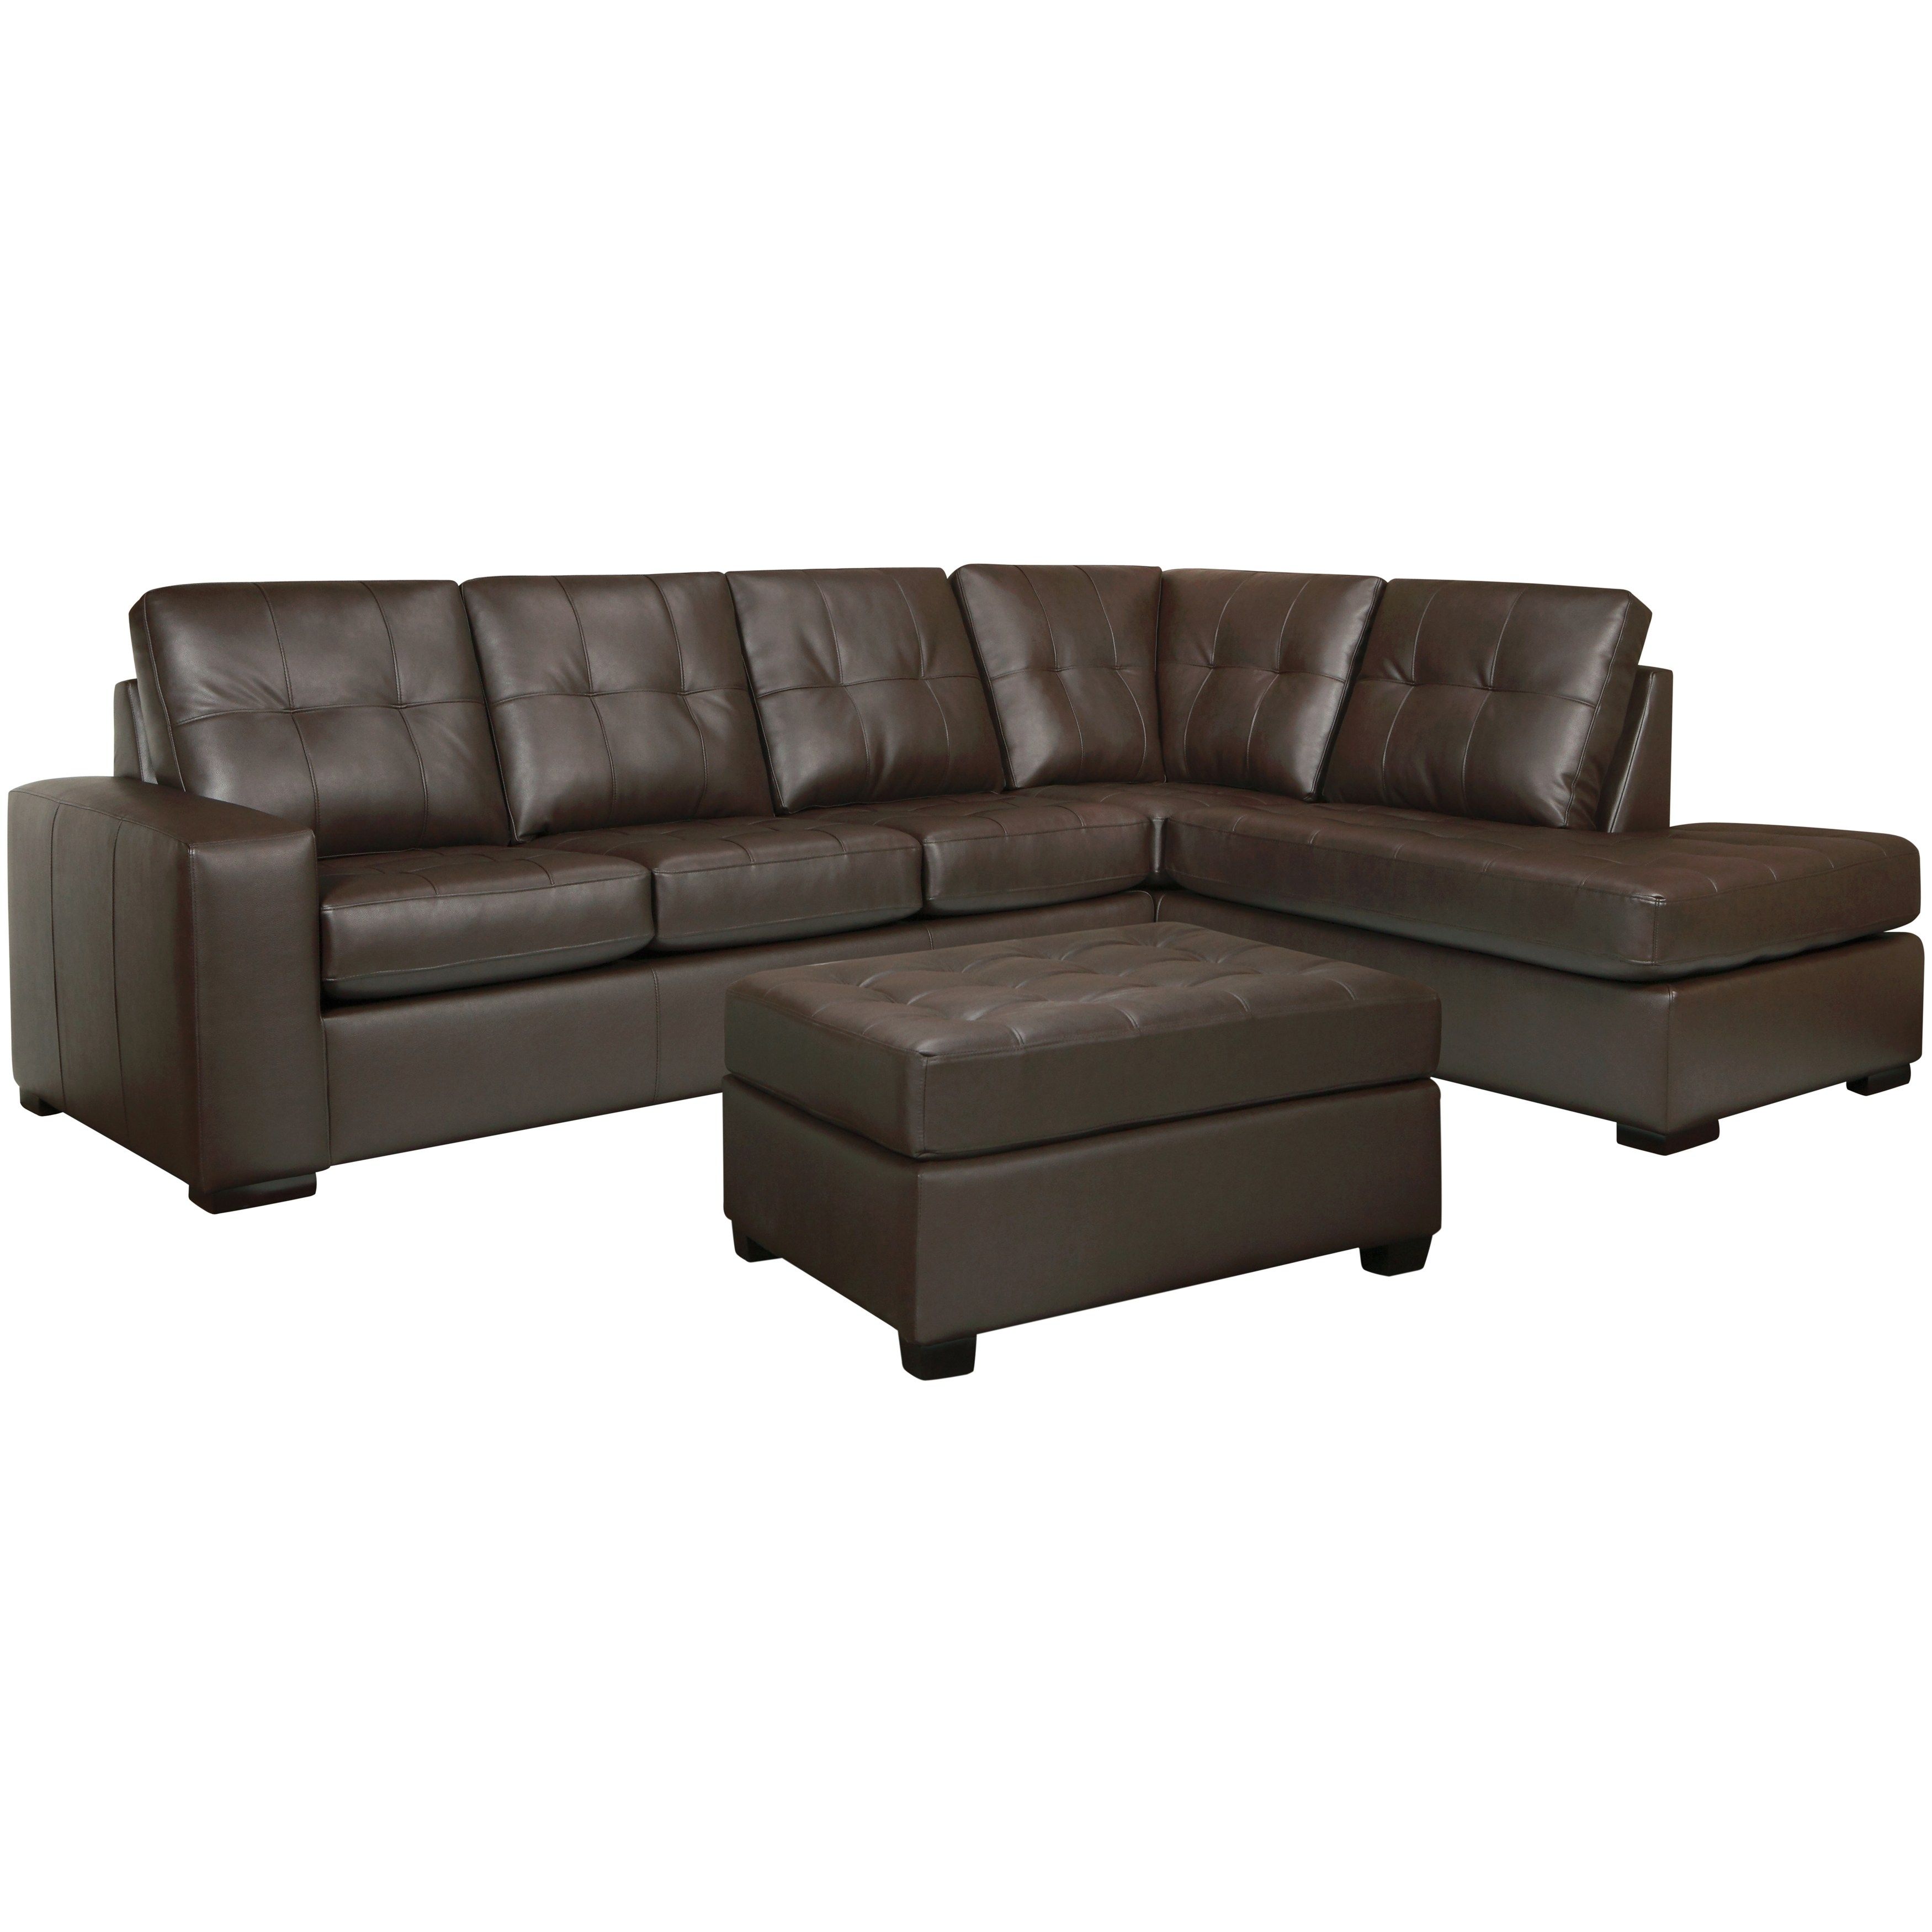 Furniture Brown Leather Sectional Couches Craigslist Missoula In Craigslist Sectional Sofa (View 9 of 15)